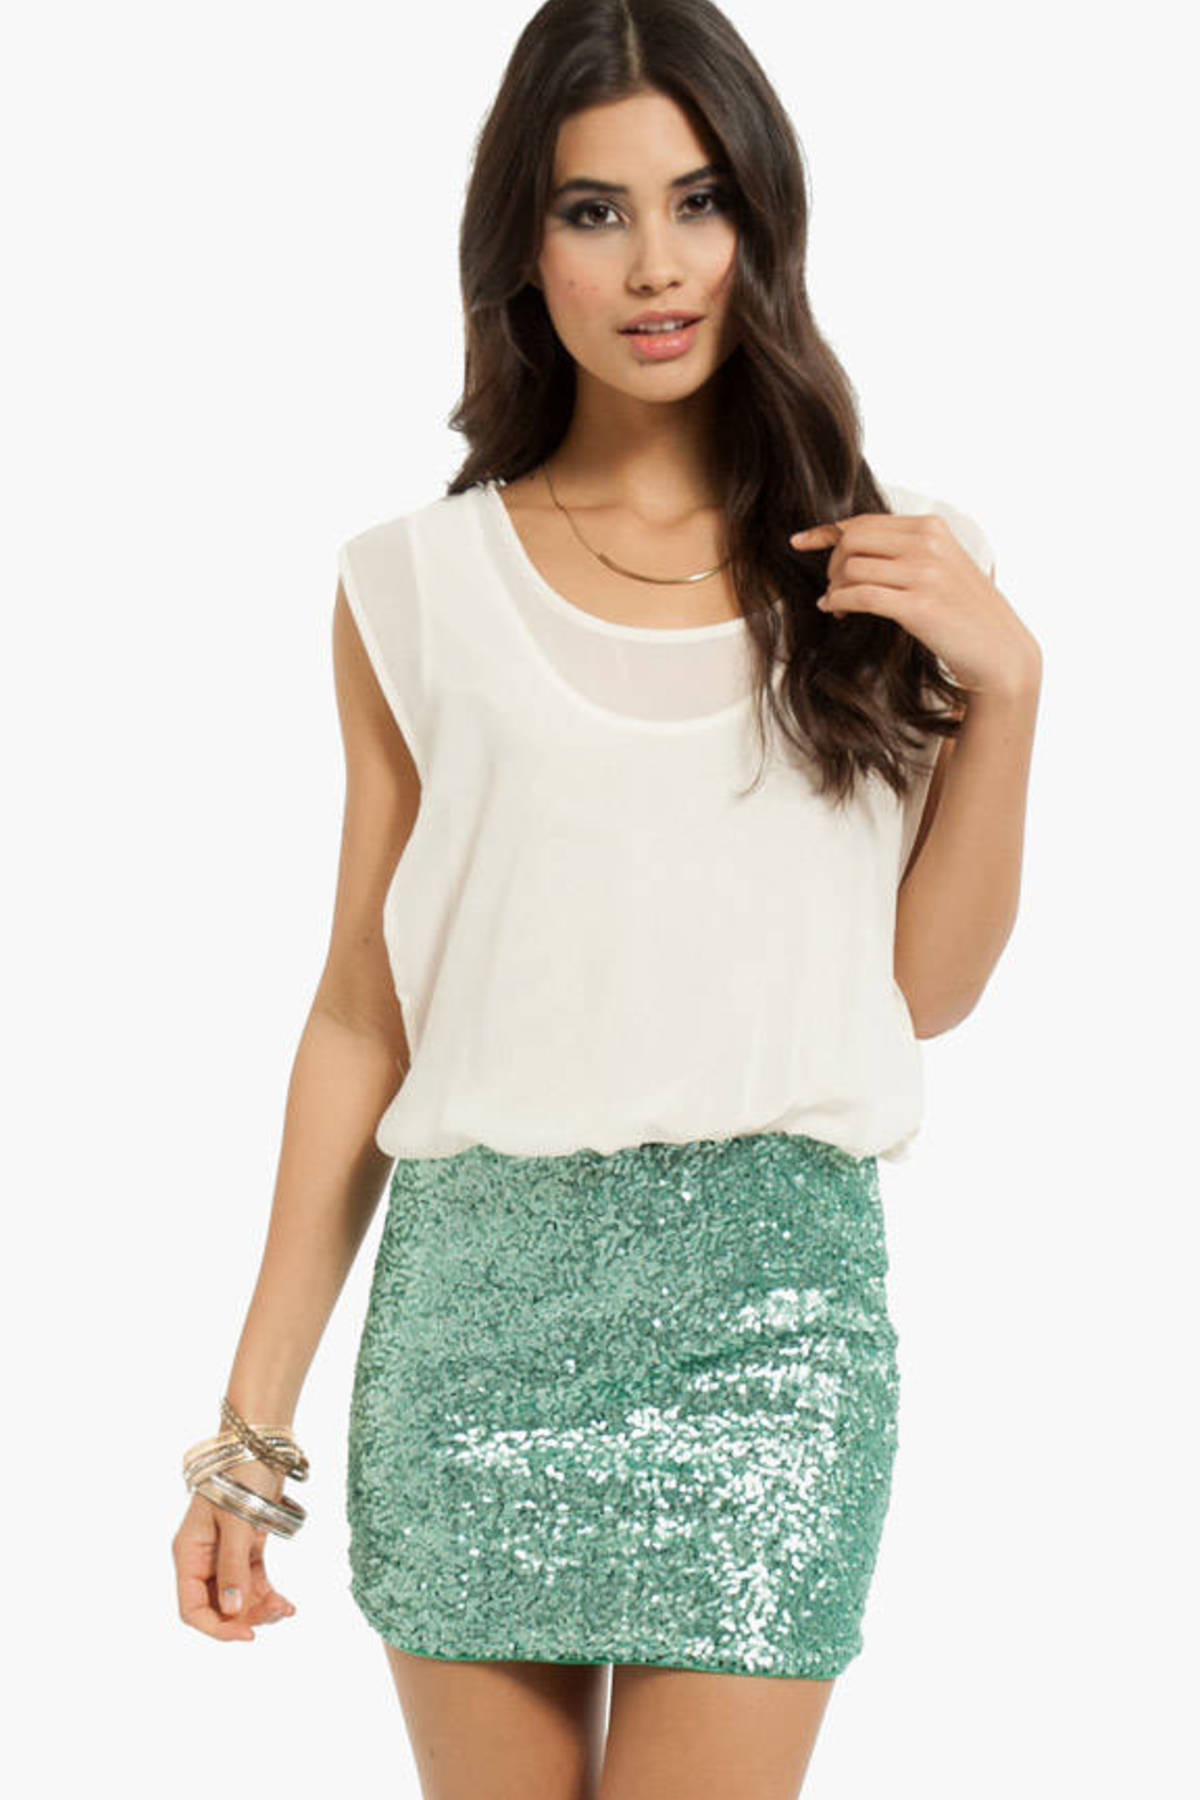 All That Sparkles Dress in Cream and Mint - $60 | Tobi US